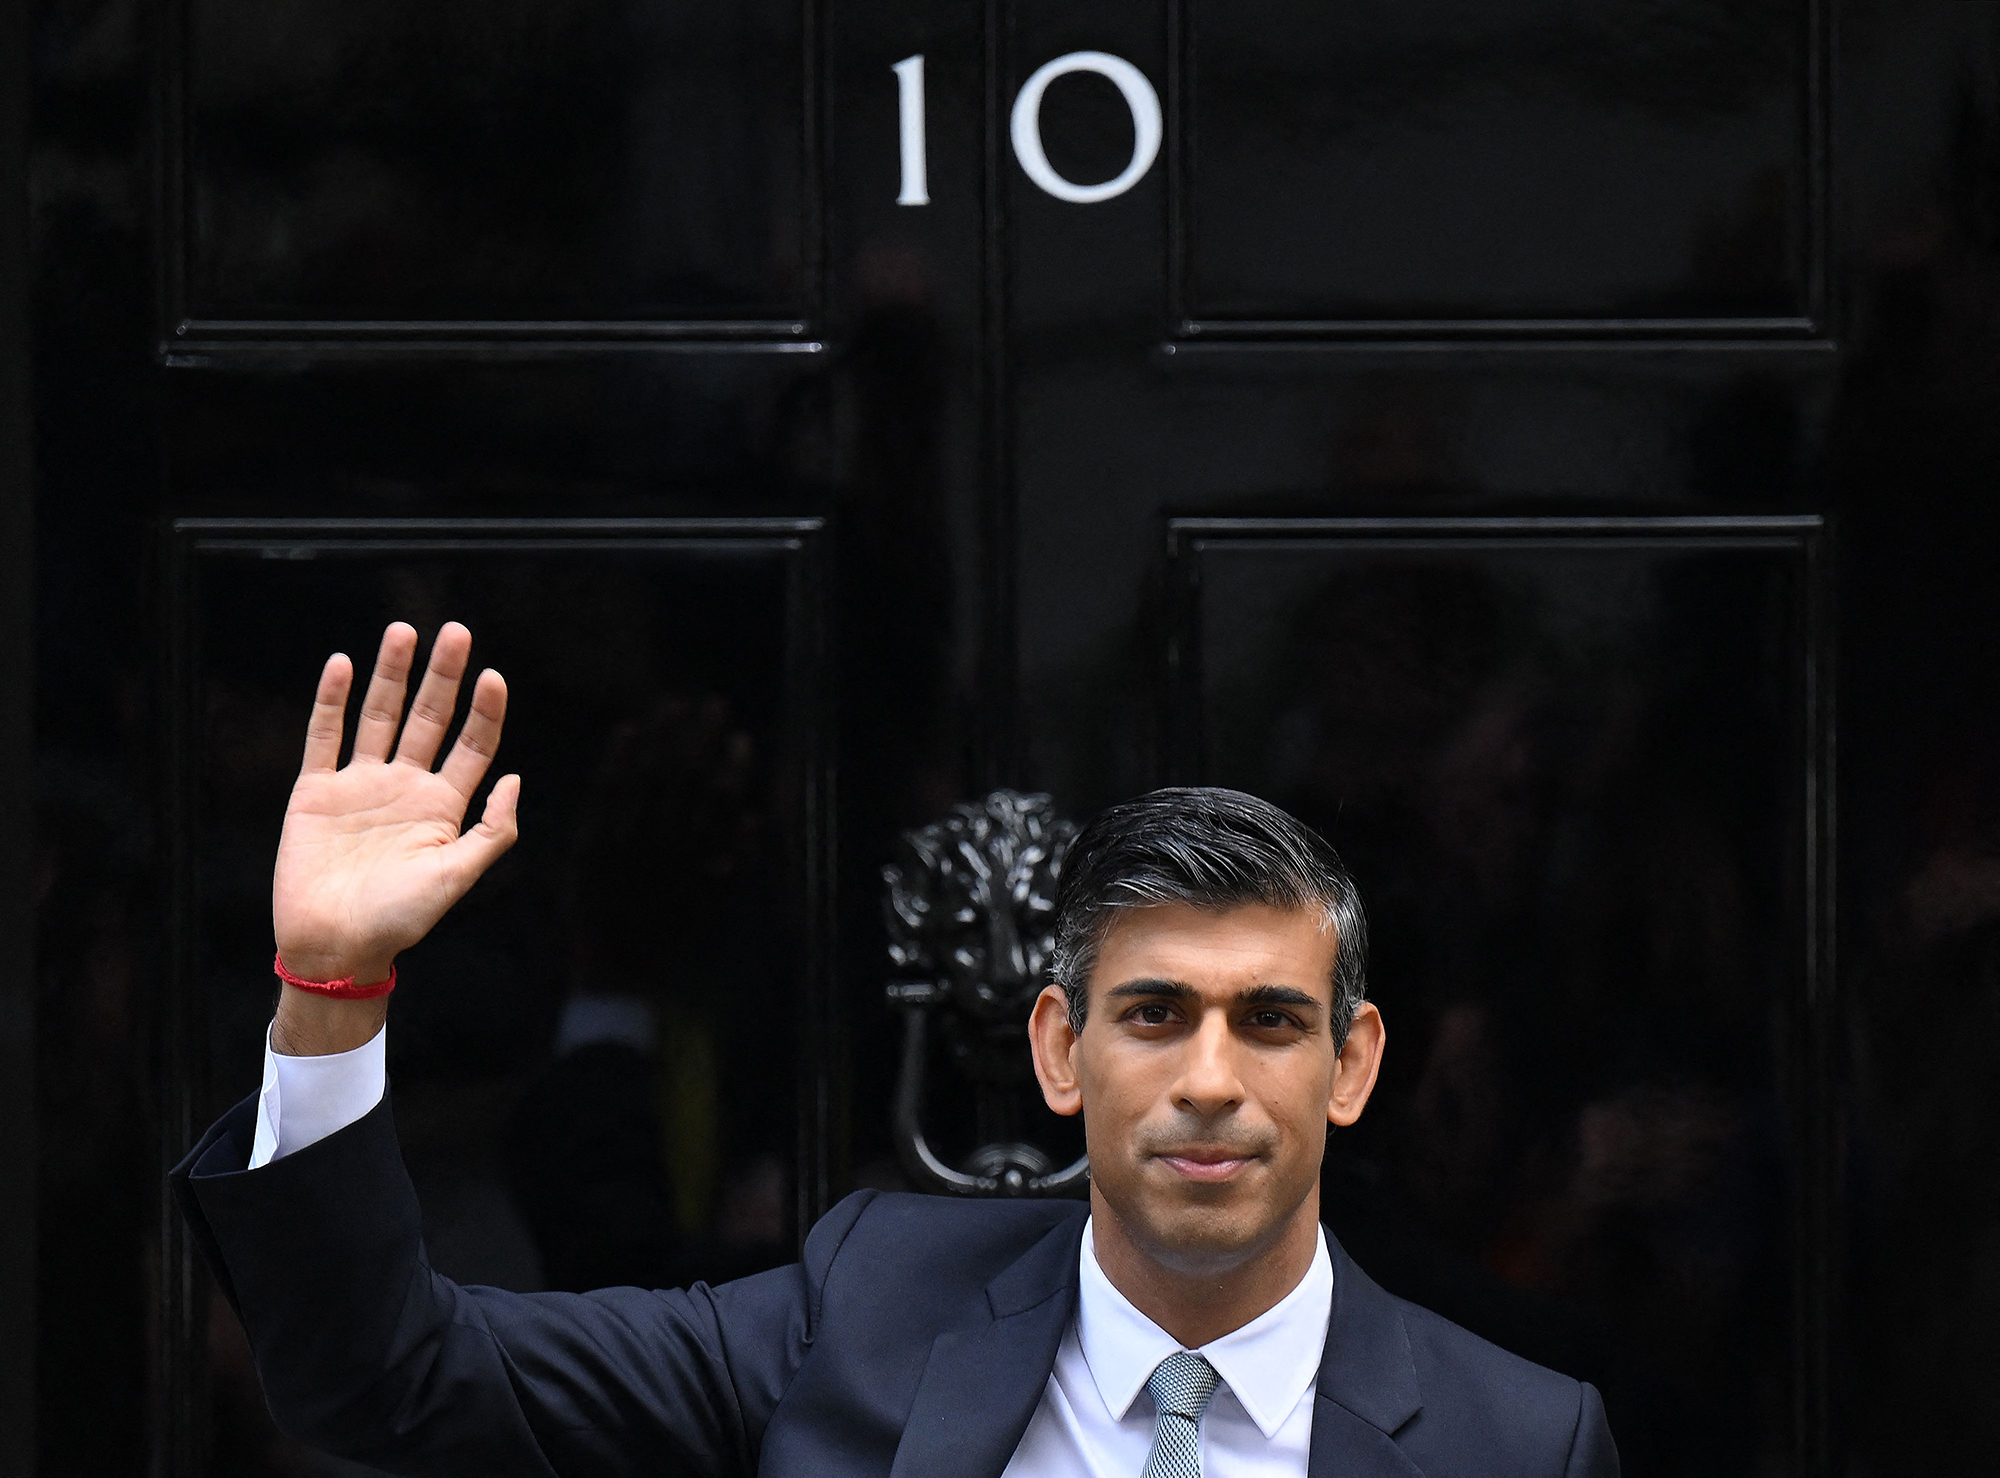 Britain's newly appointed Prime Minister Rishi Sunak waves outside 10 Downing Street in London Tuesday.